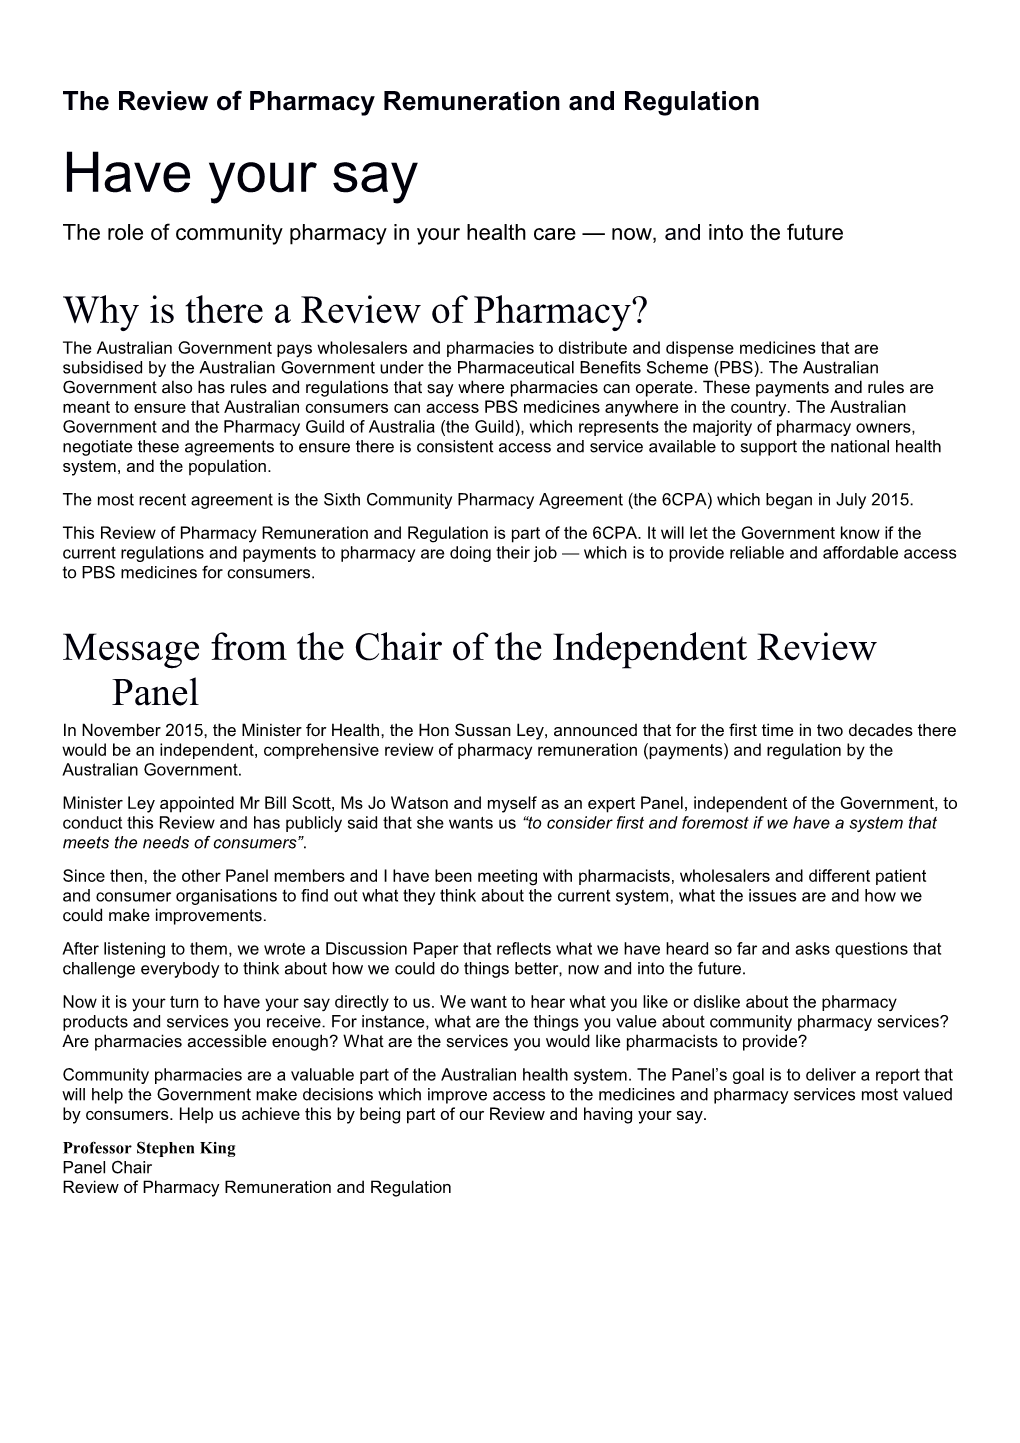 The Review of Pharmacy Remuneration and Regulation